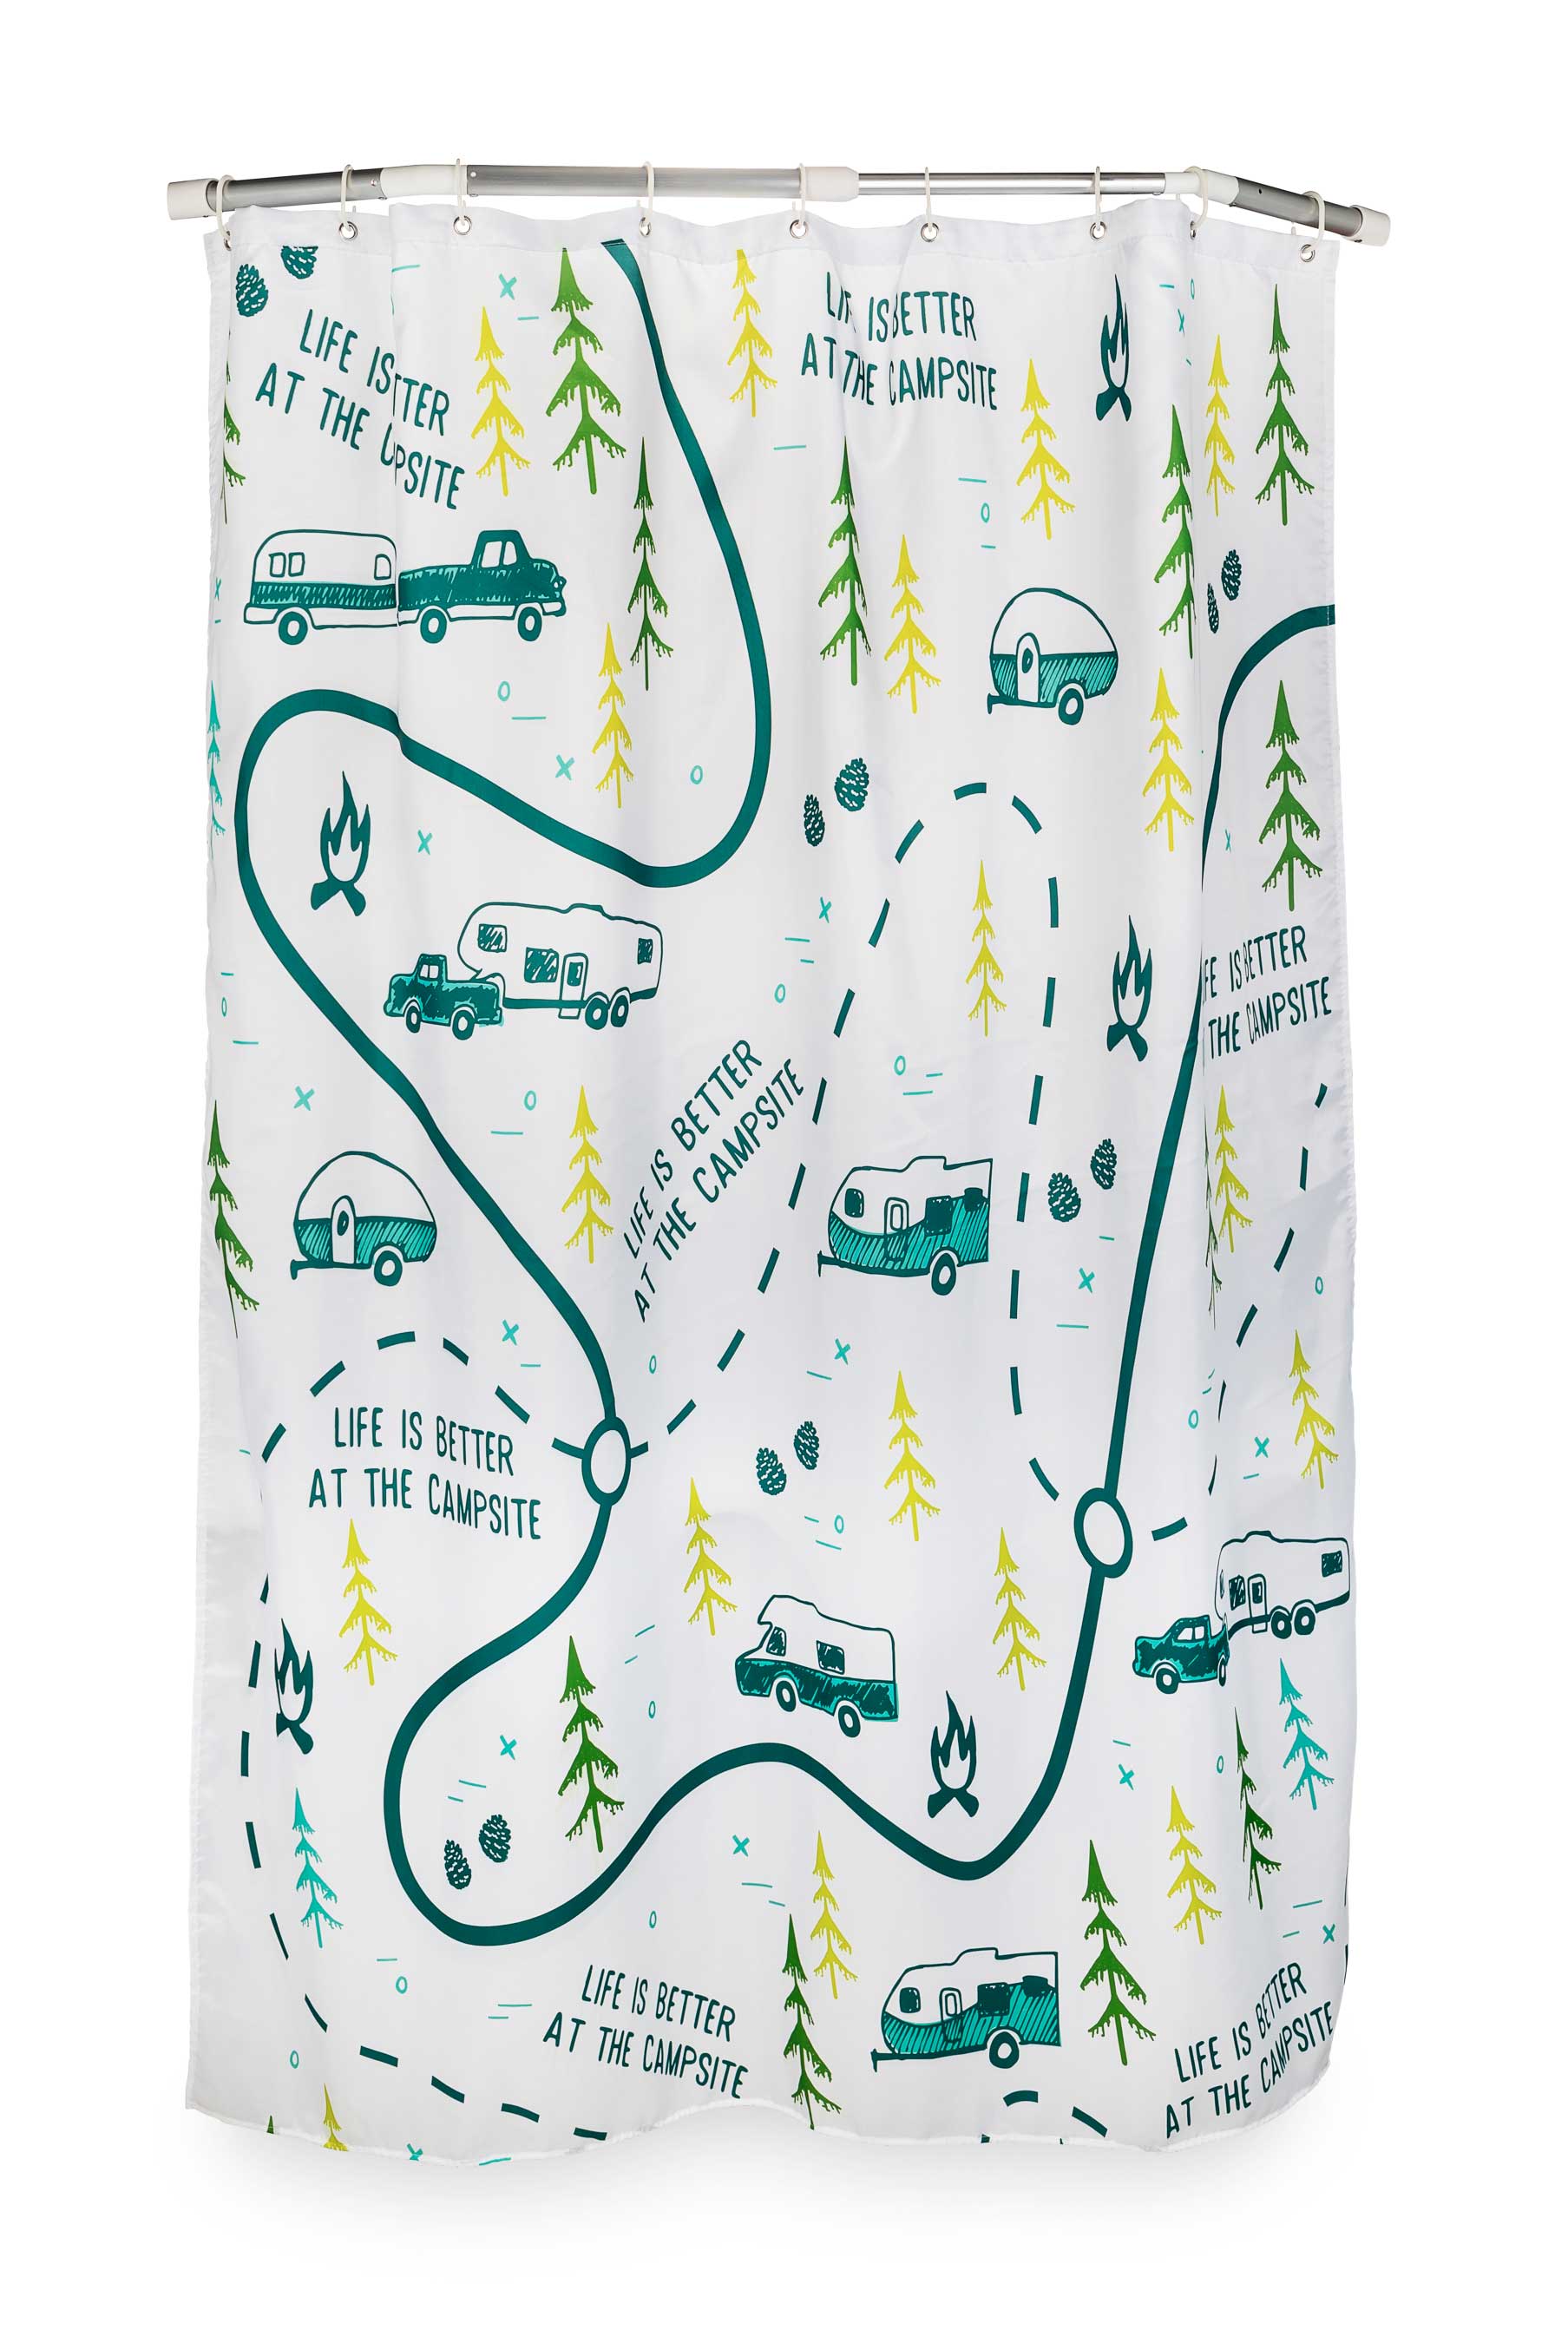 Camco 53245 LIBATC RV-Sized Shower Curtain - Map Design